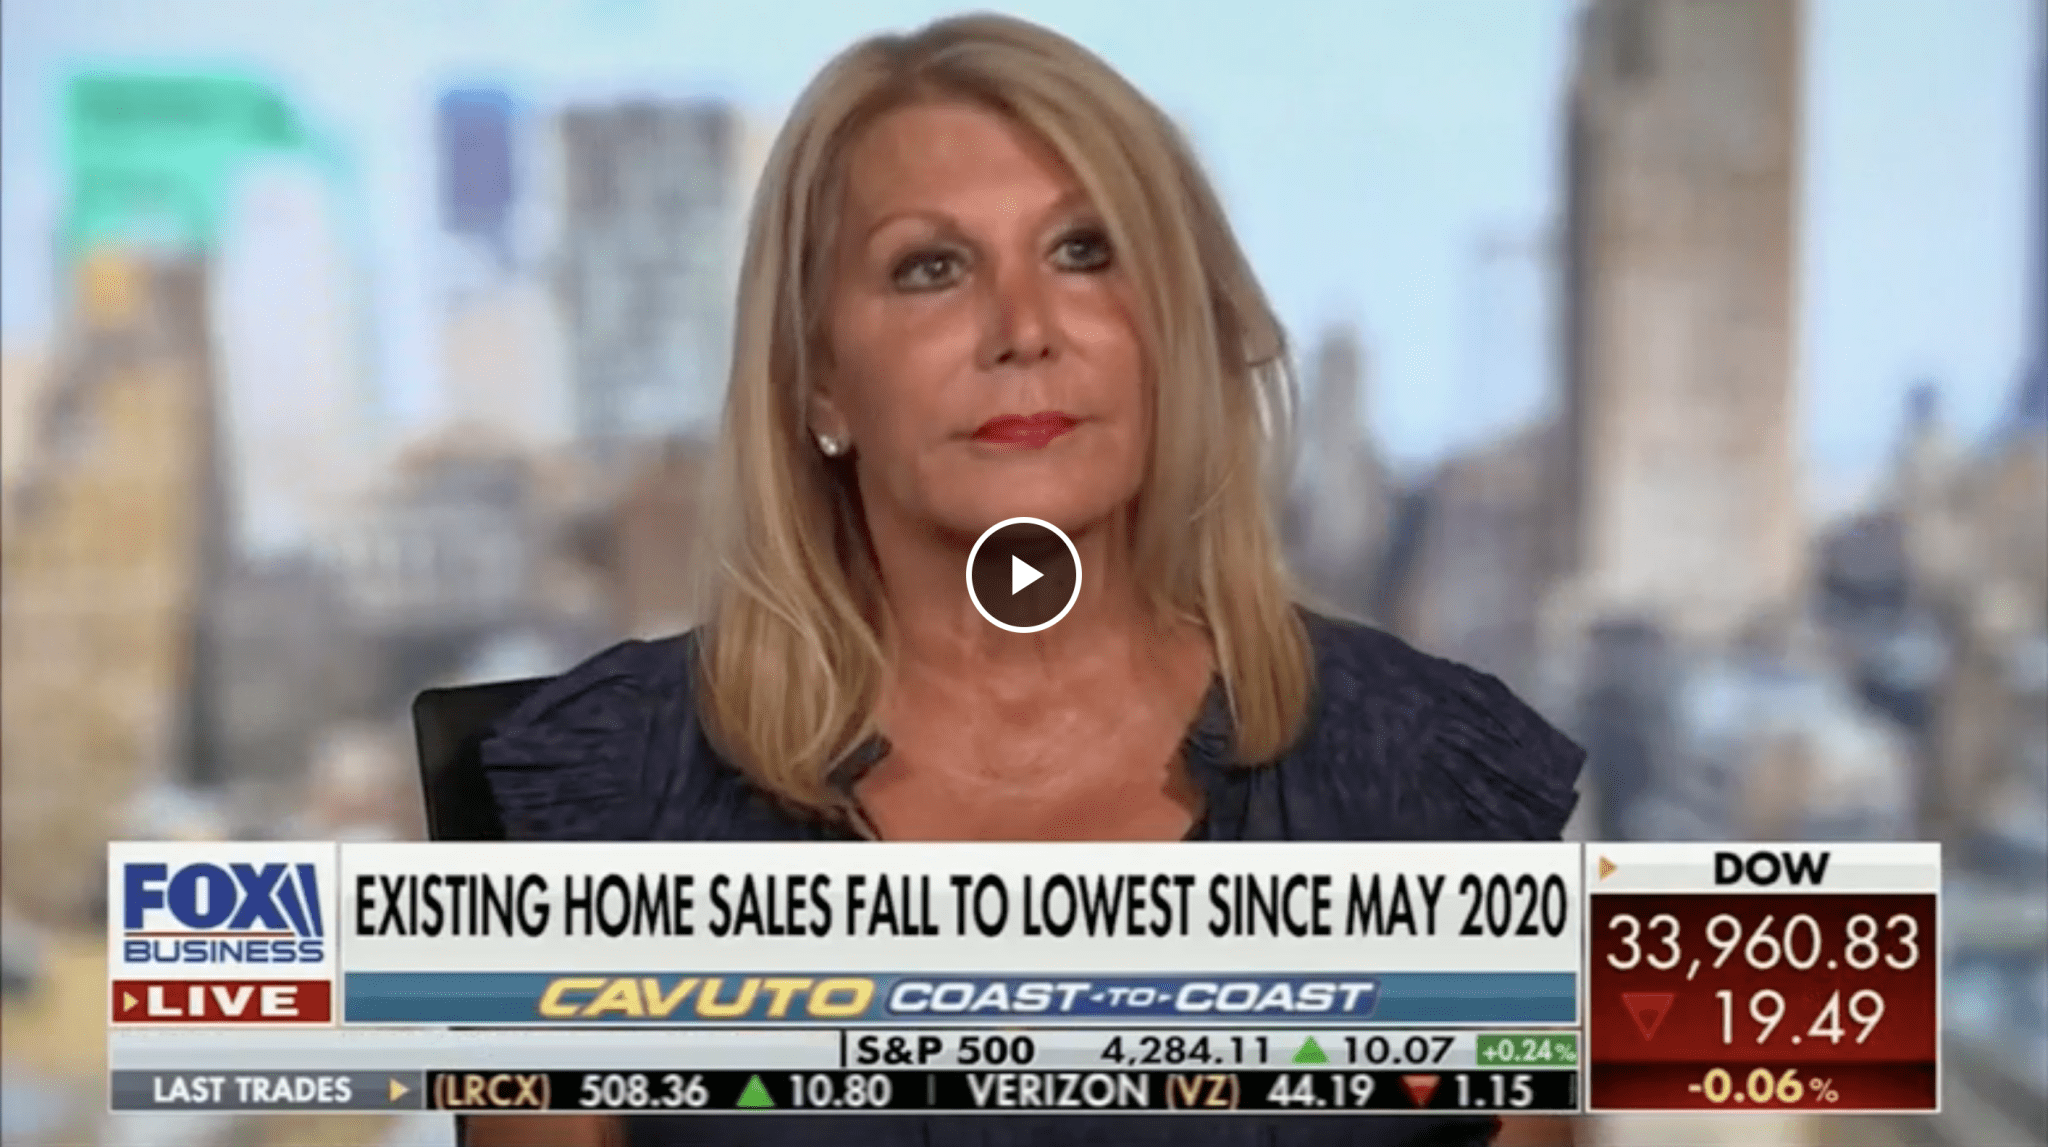 Existing Home Sales Fall To Lowest Since May 2020